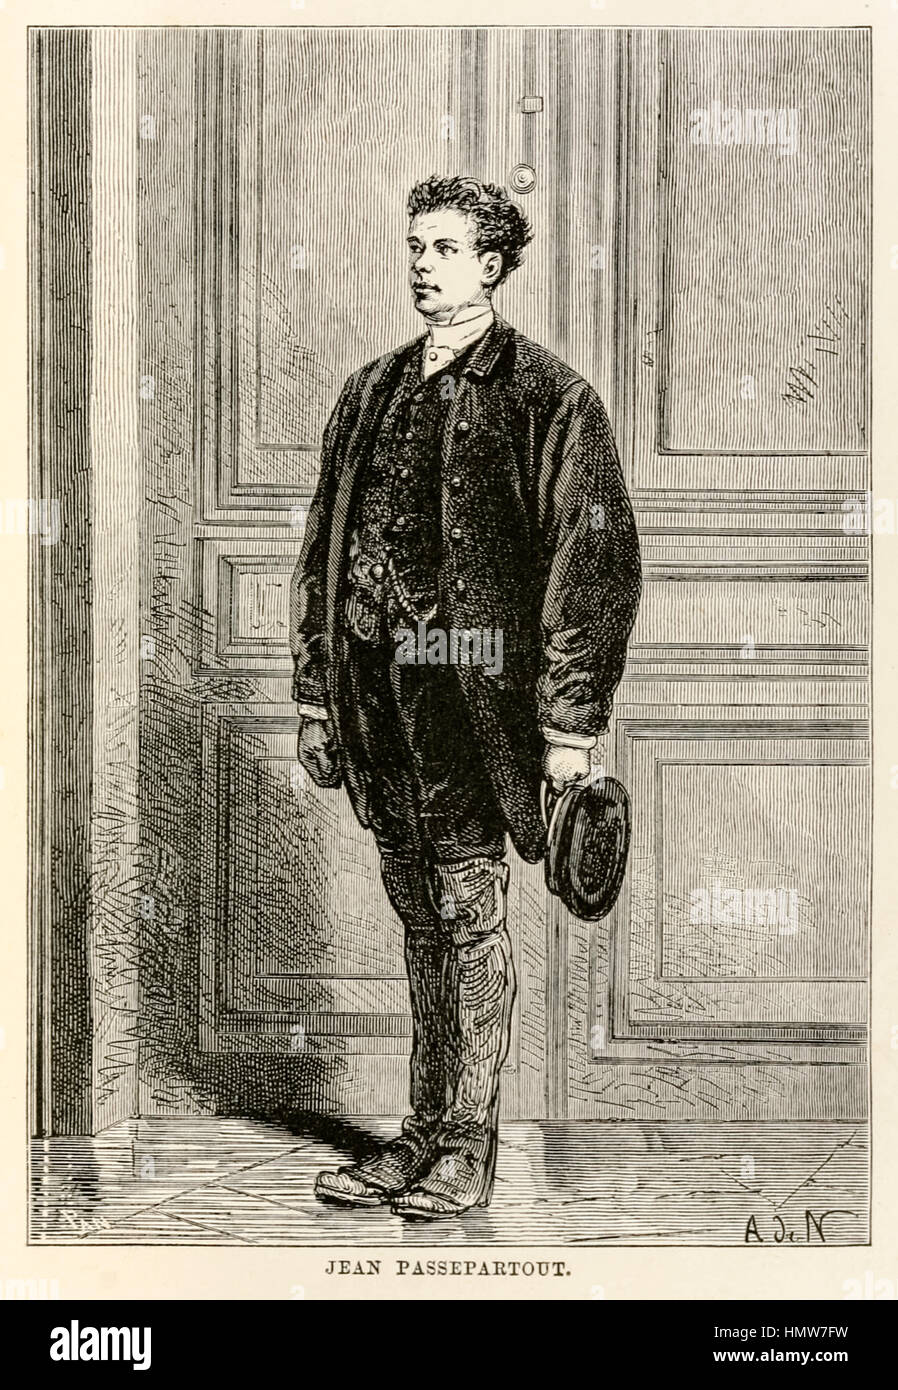 “Jean Passepartout' from ‘Around the World in Eighty Days’ by Jules Verne (1828-1905); illustration by Alphonse-Marie-Adolphe de Neuville (1835-1885) engraved by Louis Dumont (born 1822). Stock Photo